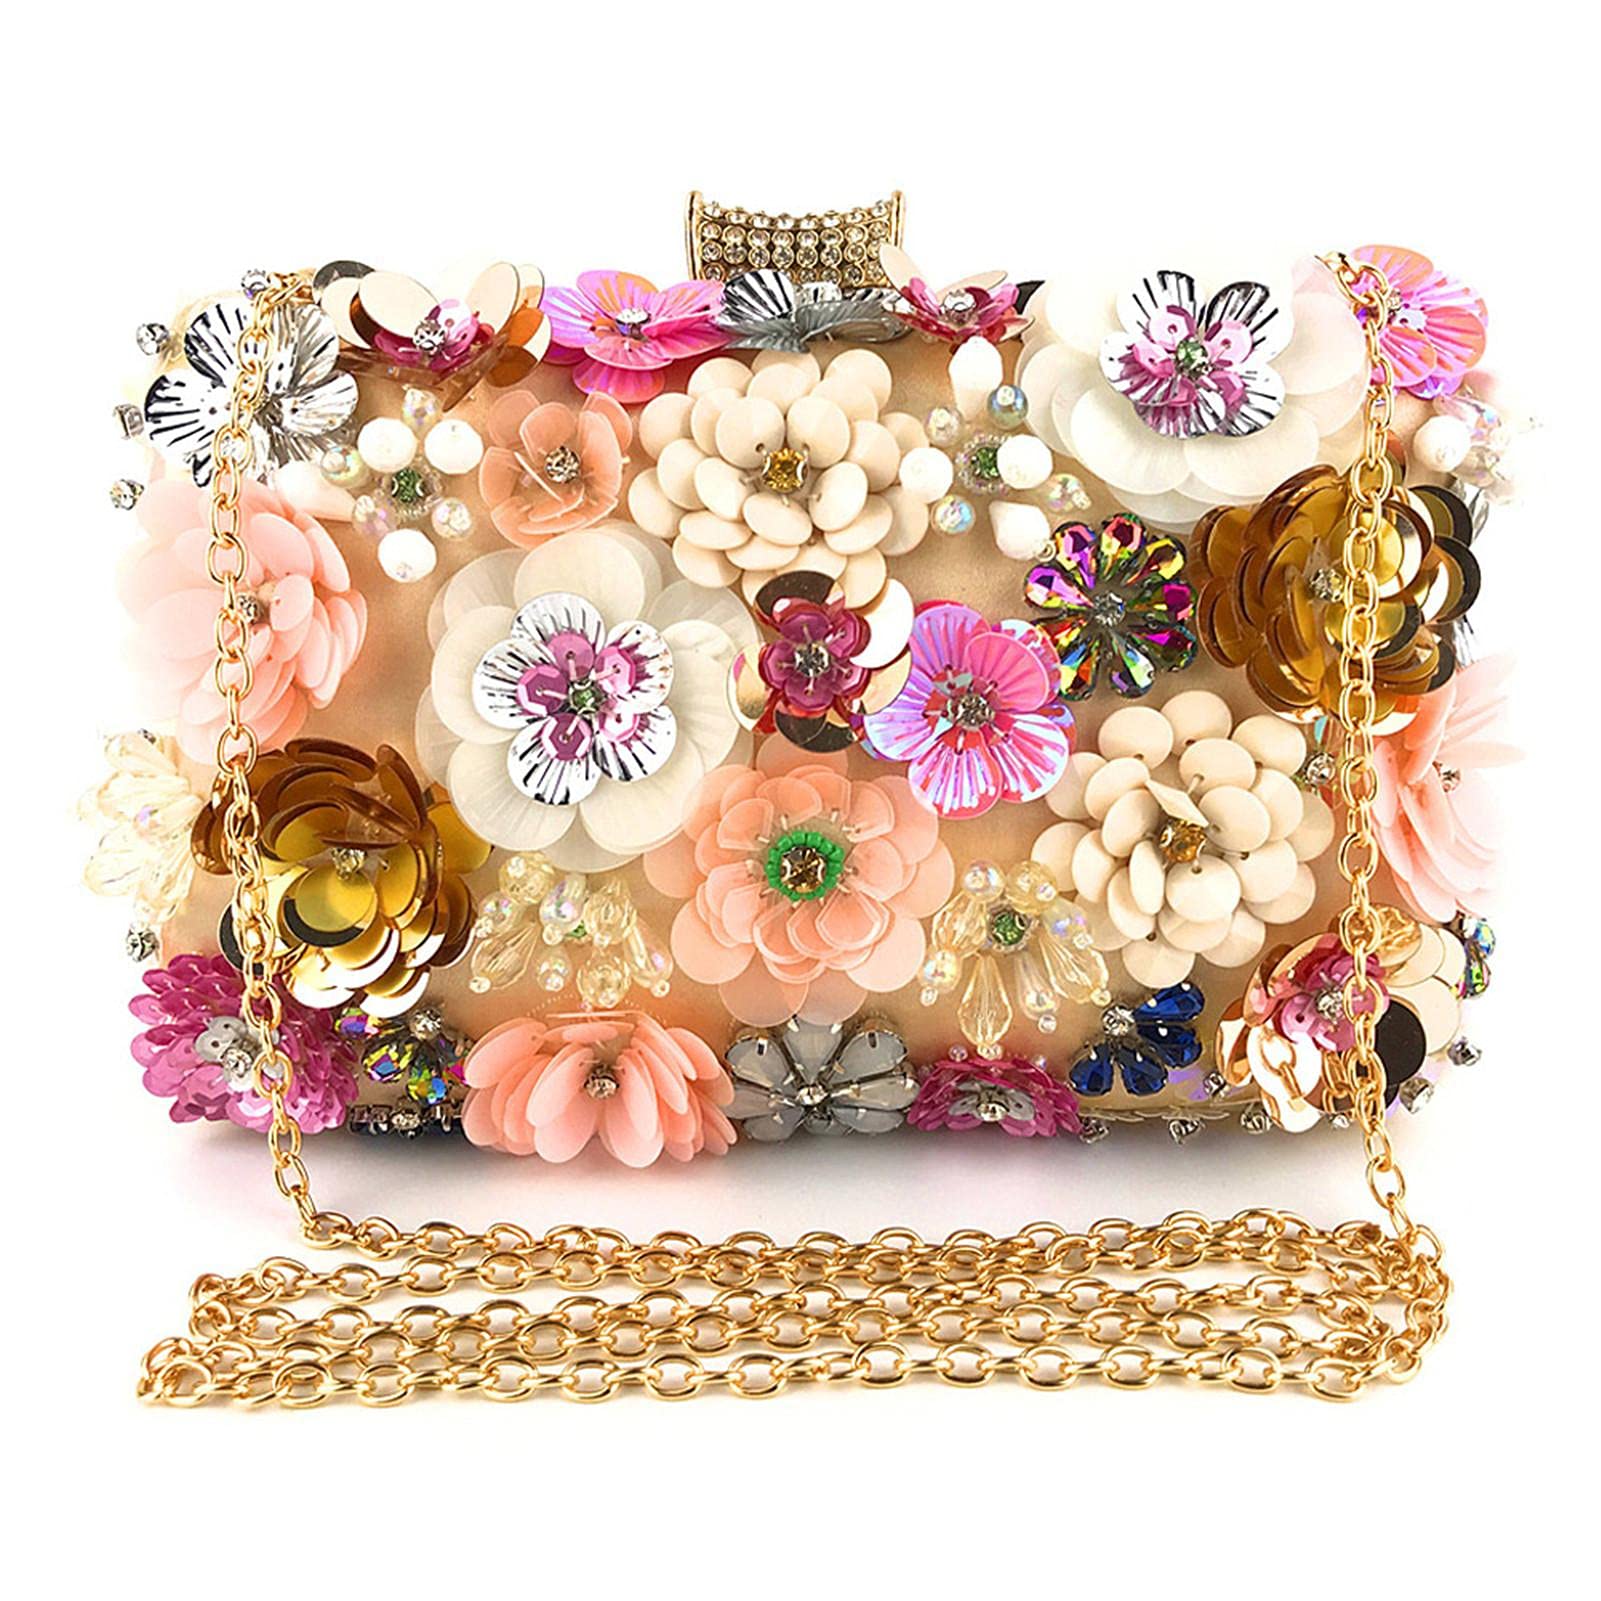 Floral Evening Bag Clutch Purse, Women Wedding Handbags with Beaded Sequins Flowers, Simulation Leather Shoulder Bag for Wedding, Bridal, Dinner, Wedding, Cocktail Party, Formal Occasions yahede